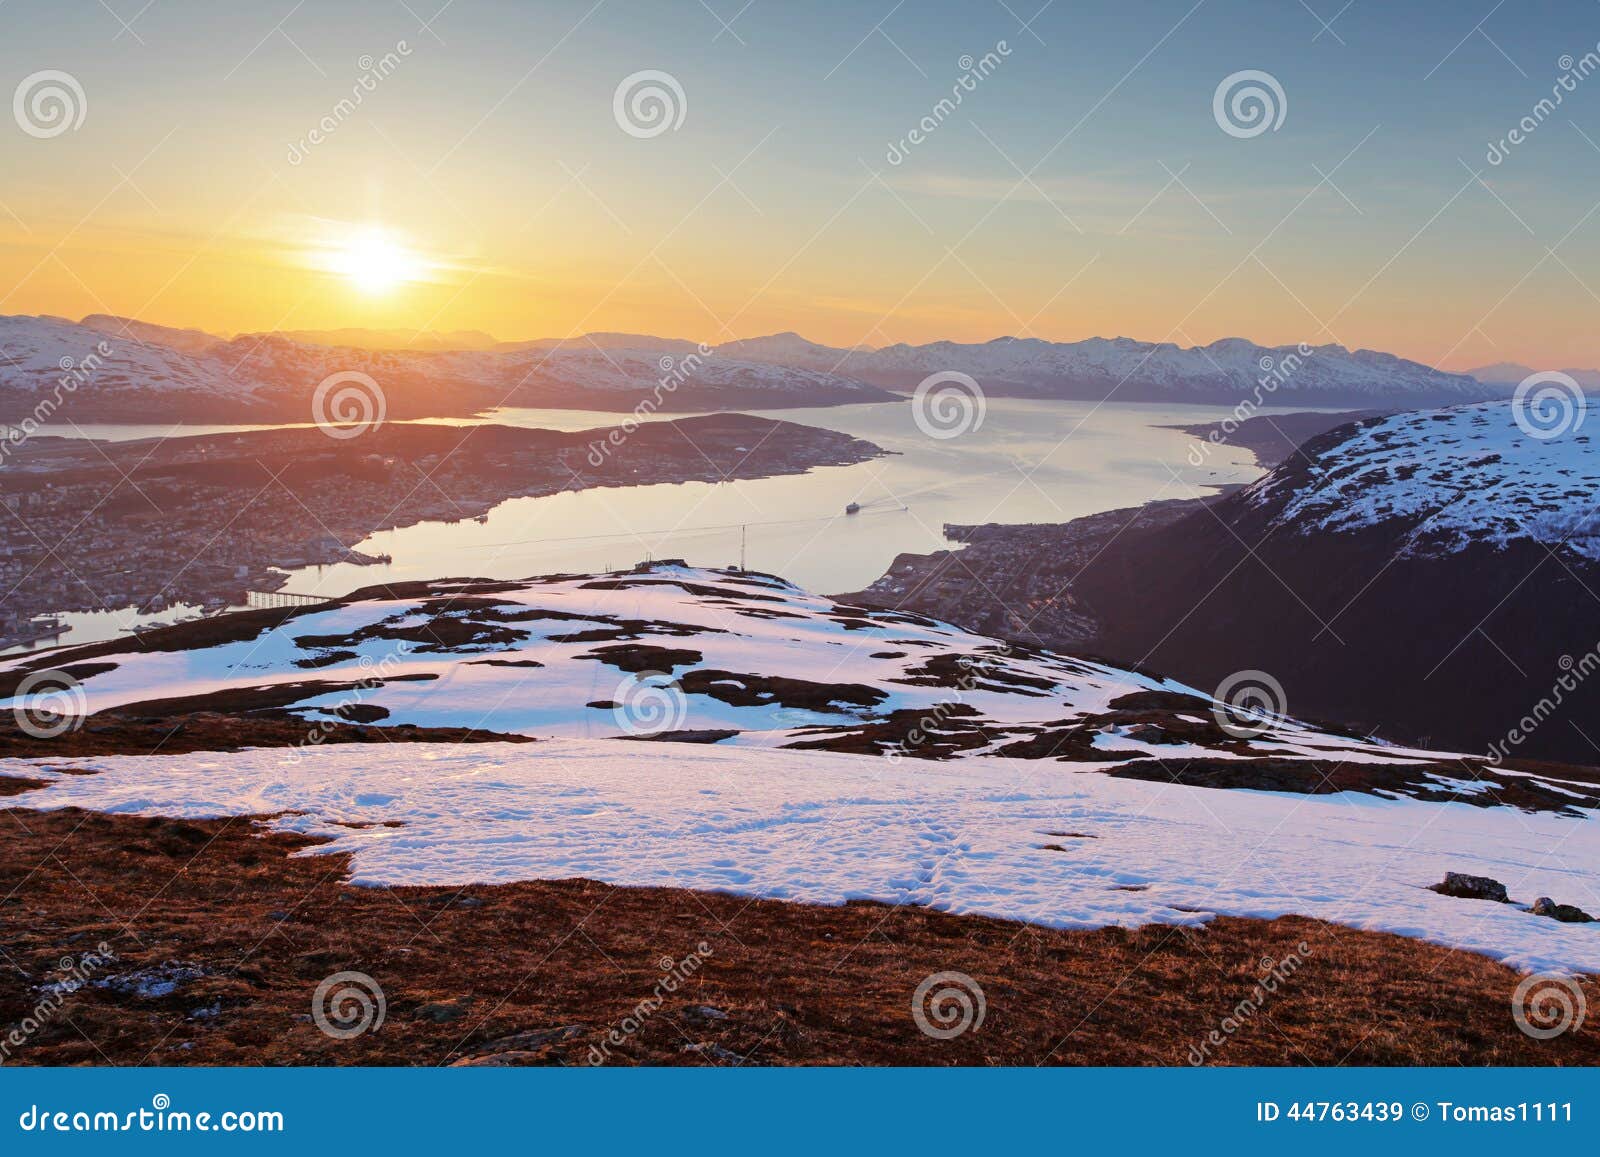 sunset in moutain with fjord - tromso